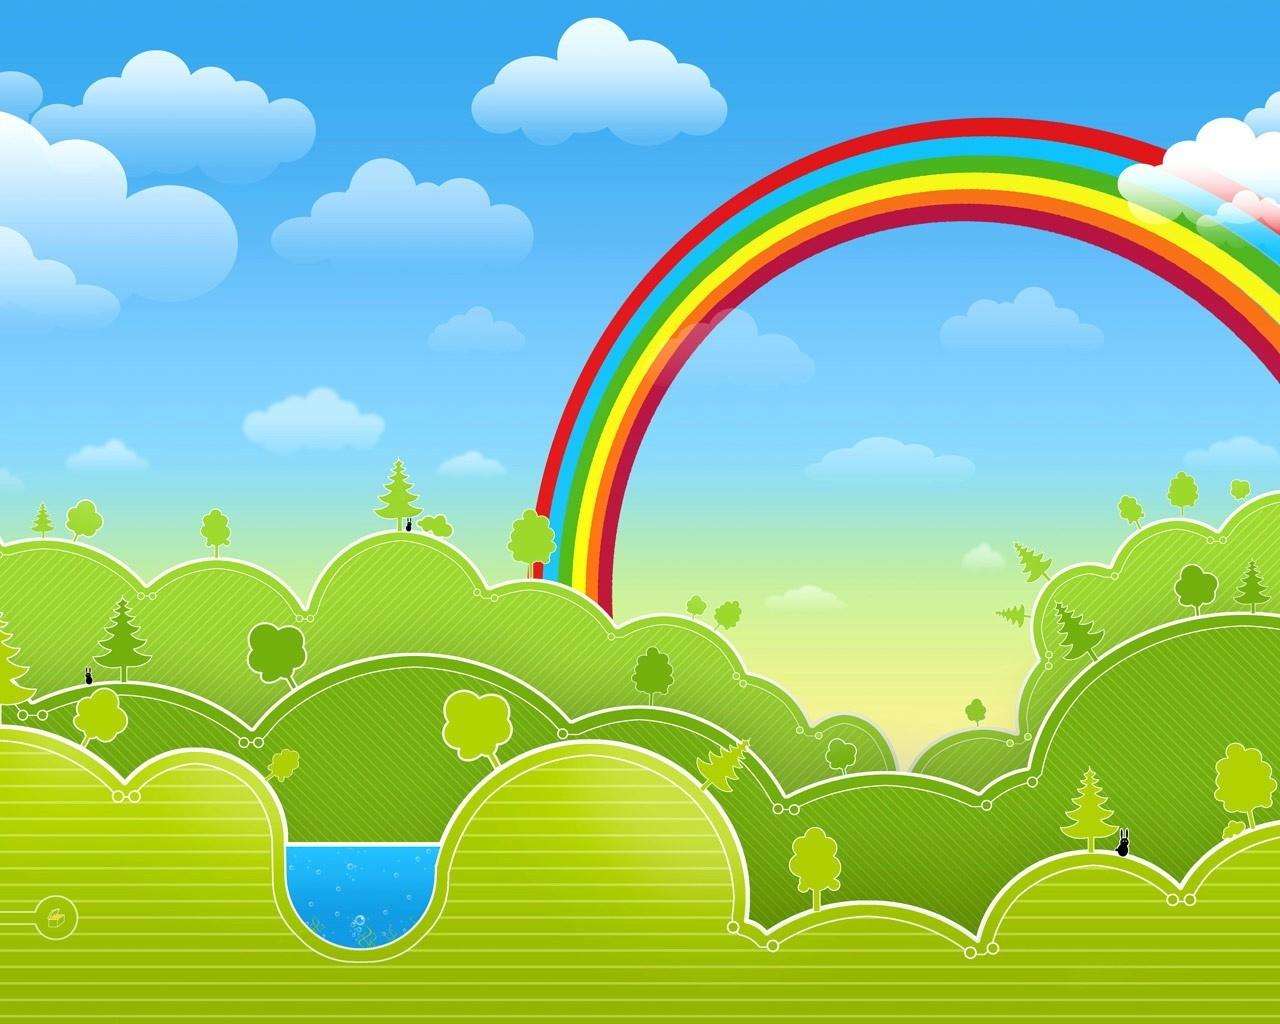 Download wallpaper: green trees, blue Sky, Rainbow. download photo